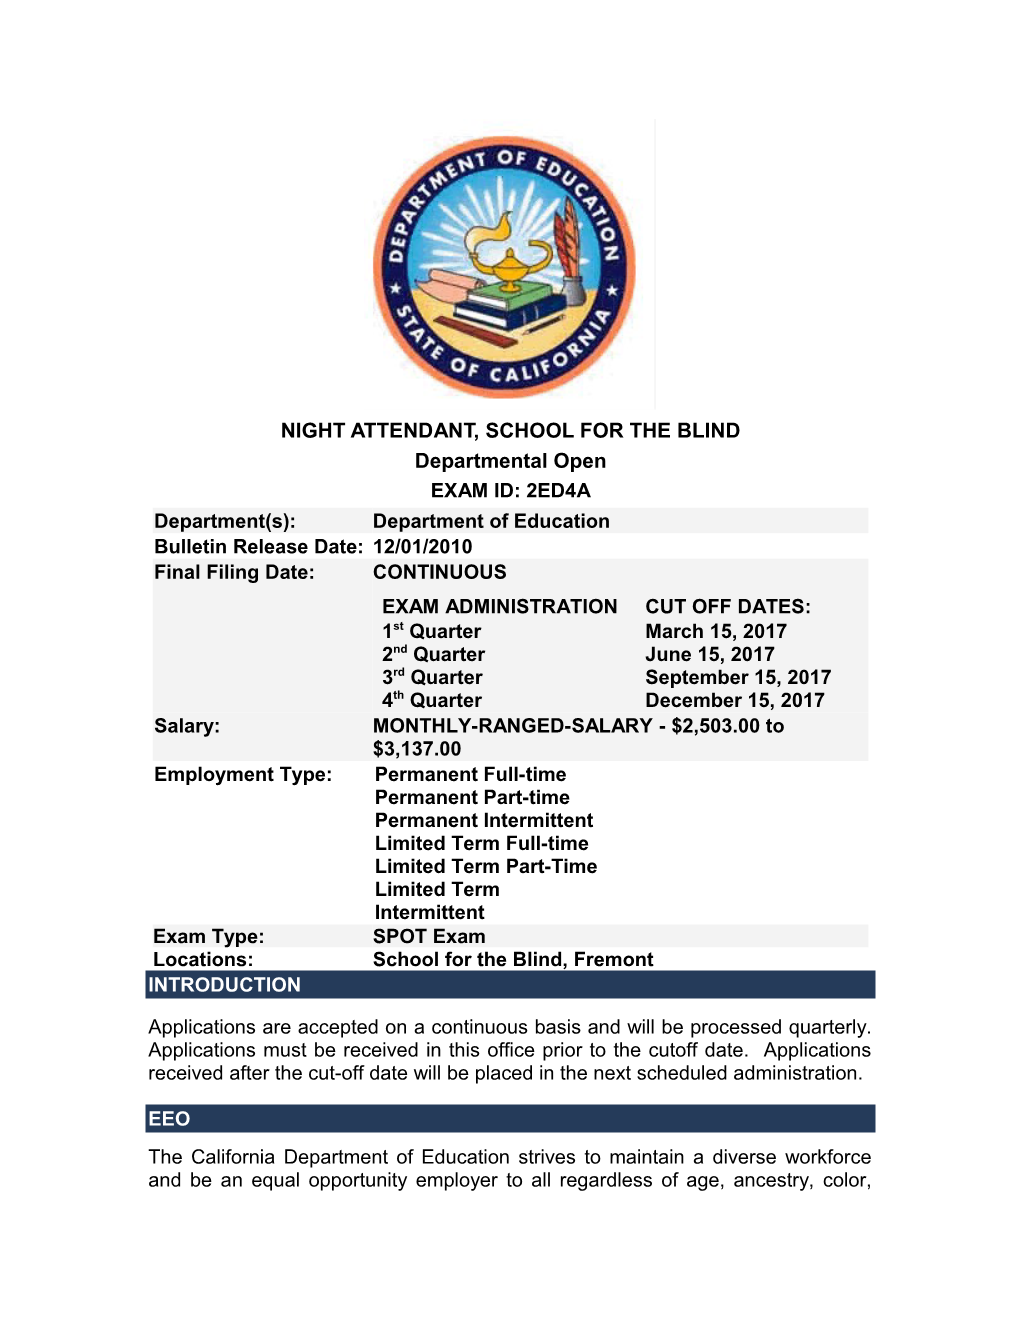 Night Attendant, School for the Blind - Jobs at CDE (CA Dept of Education)